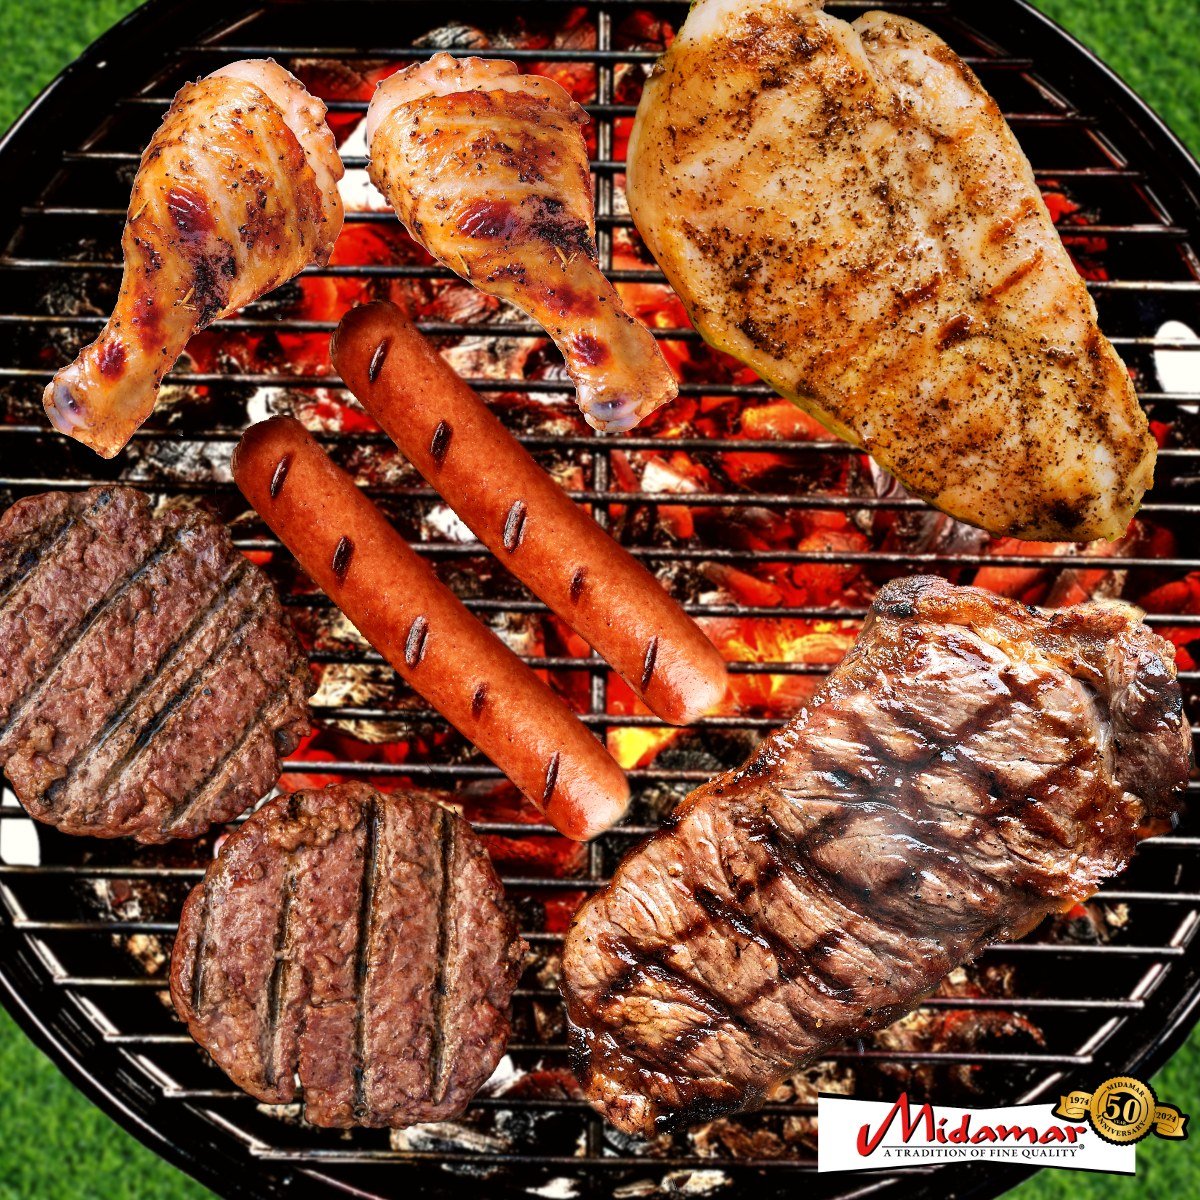 No matter your protein preference, we've got the perfect Halal options for your grill! 

#MidamarHalal #Halal #GrillProteins #Grilling